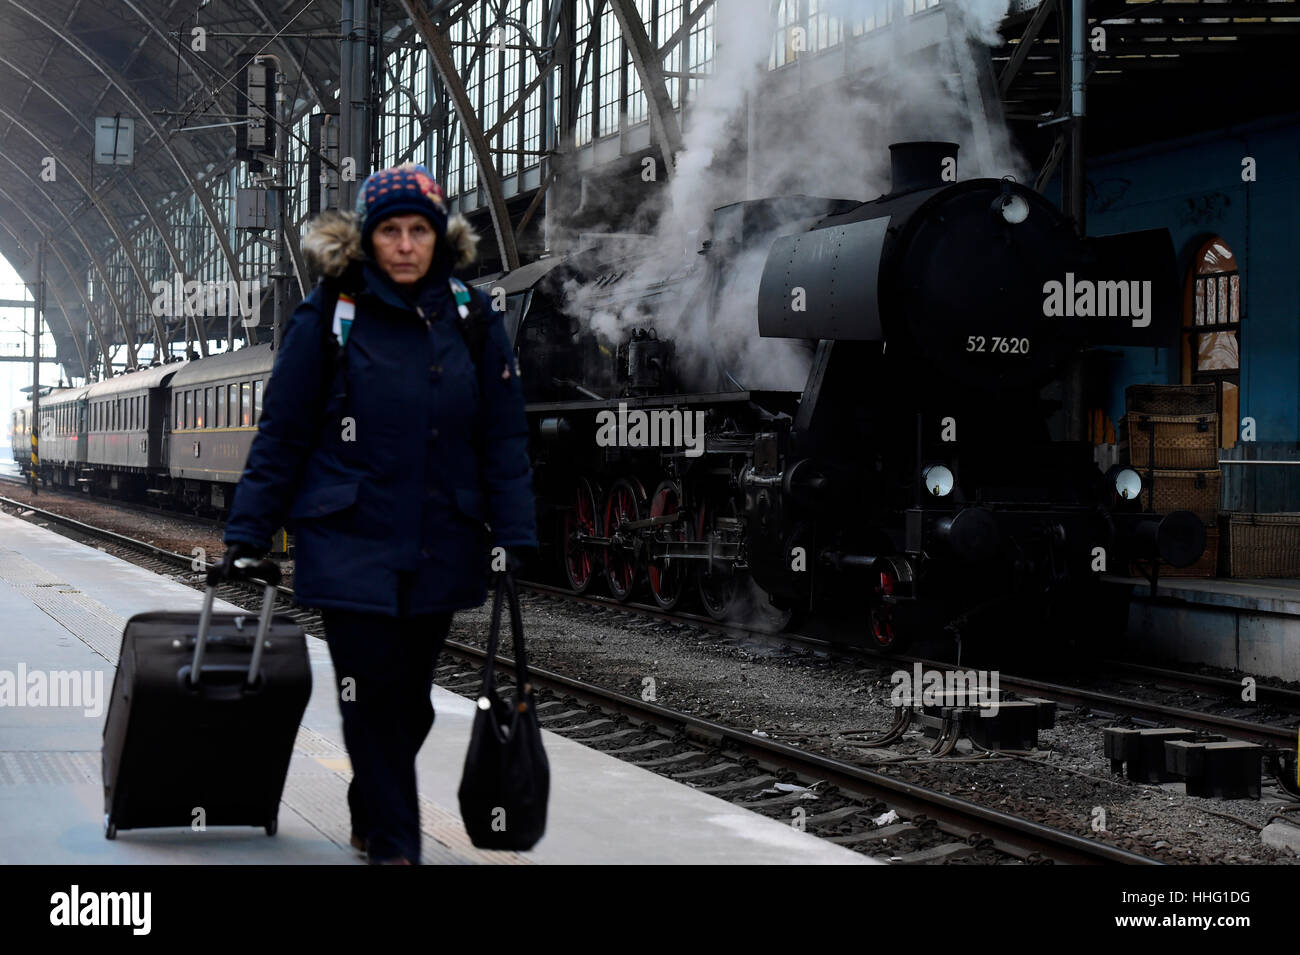 Prague, Czech Republic. 19th Jan, 2017. Filming of new World War Two drama The Aftermath set in post-war Hamburg, Germany in 1946 at Main Railway Station in Prague, Czech Republic, January 19, 2017. The film follows Keira Knigtley (not pictured) as Rachael Morgan, whose colonel husband Lewis, played by Jason Clarke (not pictured), is put in charge of rebuilding the city of Hamburg. Credit: Ondrej Deml/CTK Photo/Alamy Live News Stock Photo